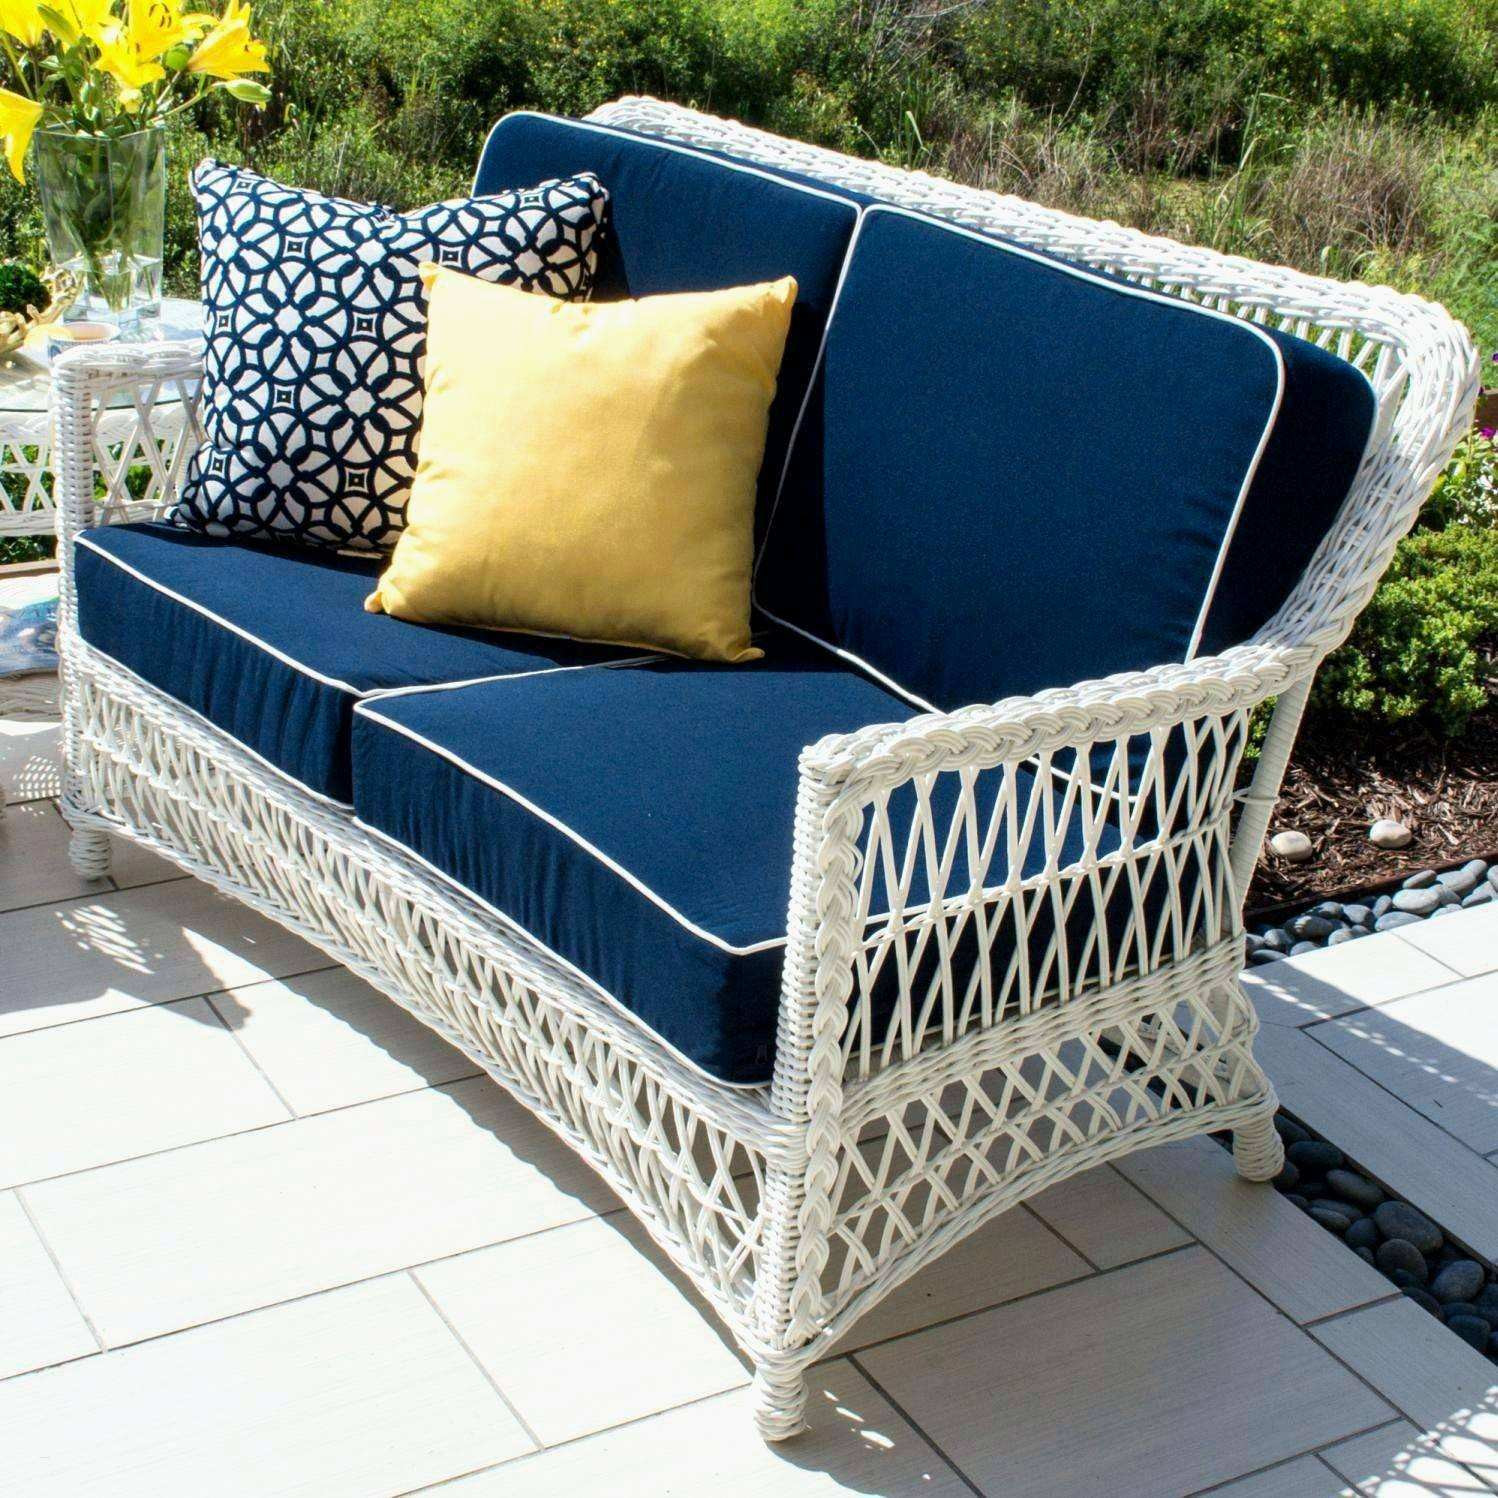 cemetery vase liners of awesome planter ideas garden ideas throughout patio cover ideas awesome wicker outdoor sofa 0d patio chairs sale replacement cushions design